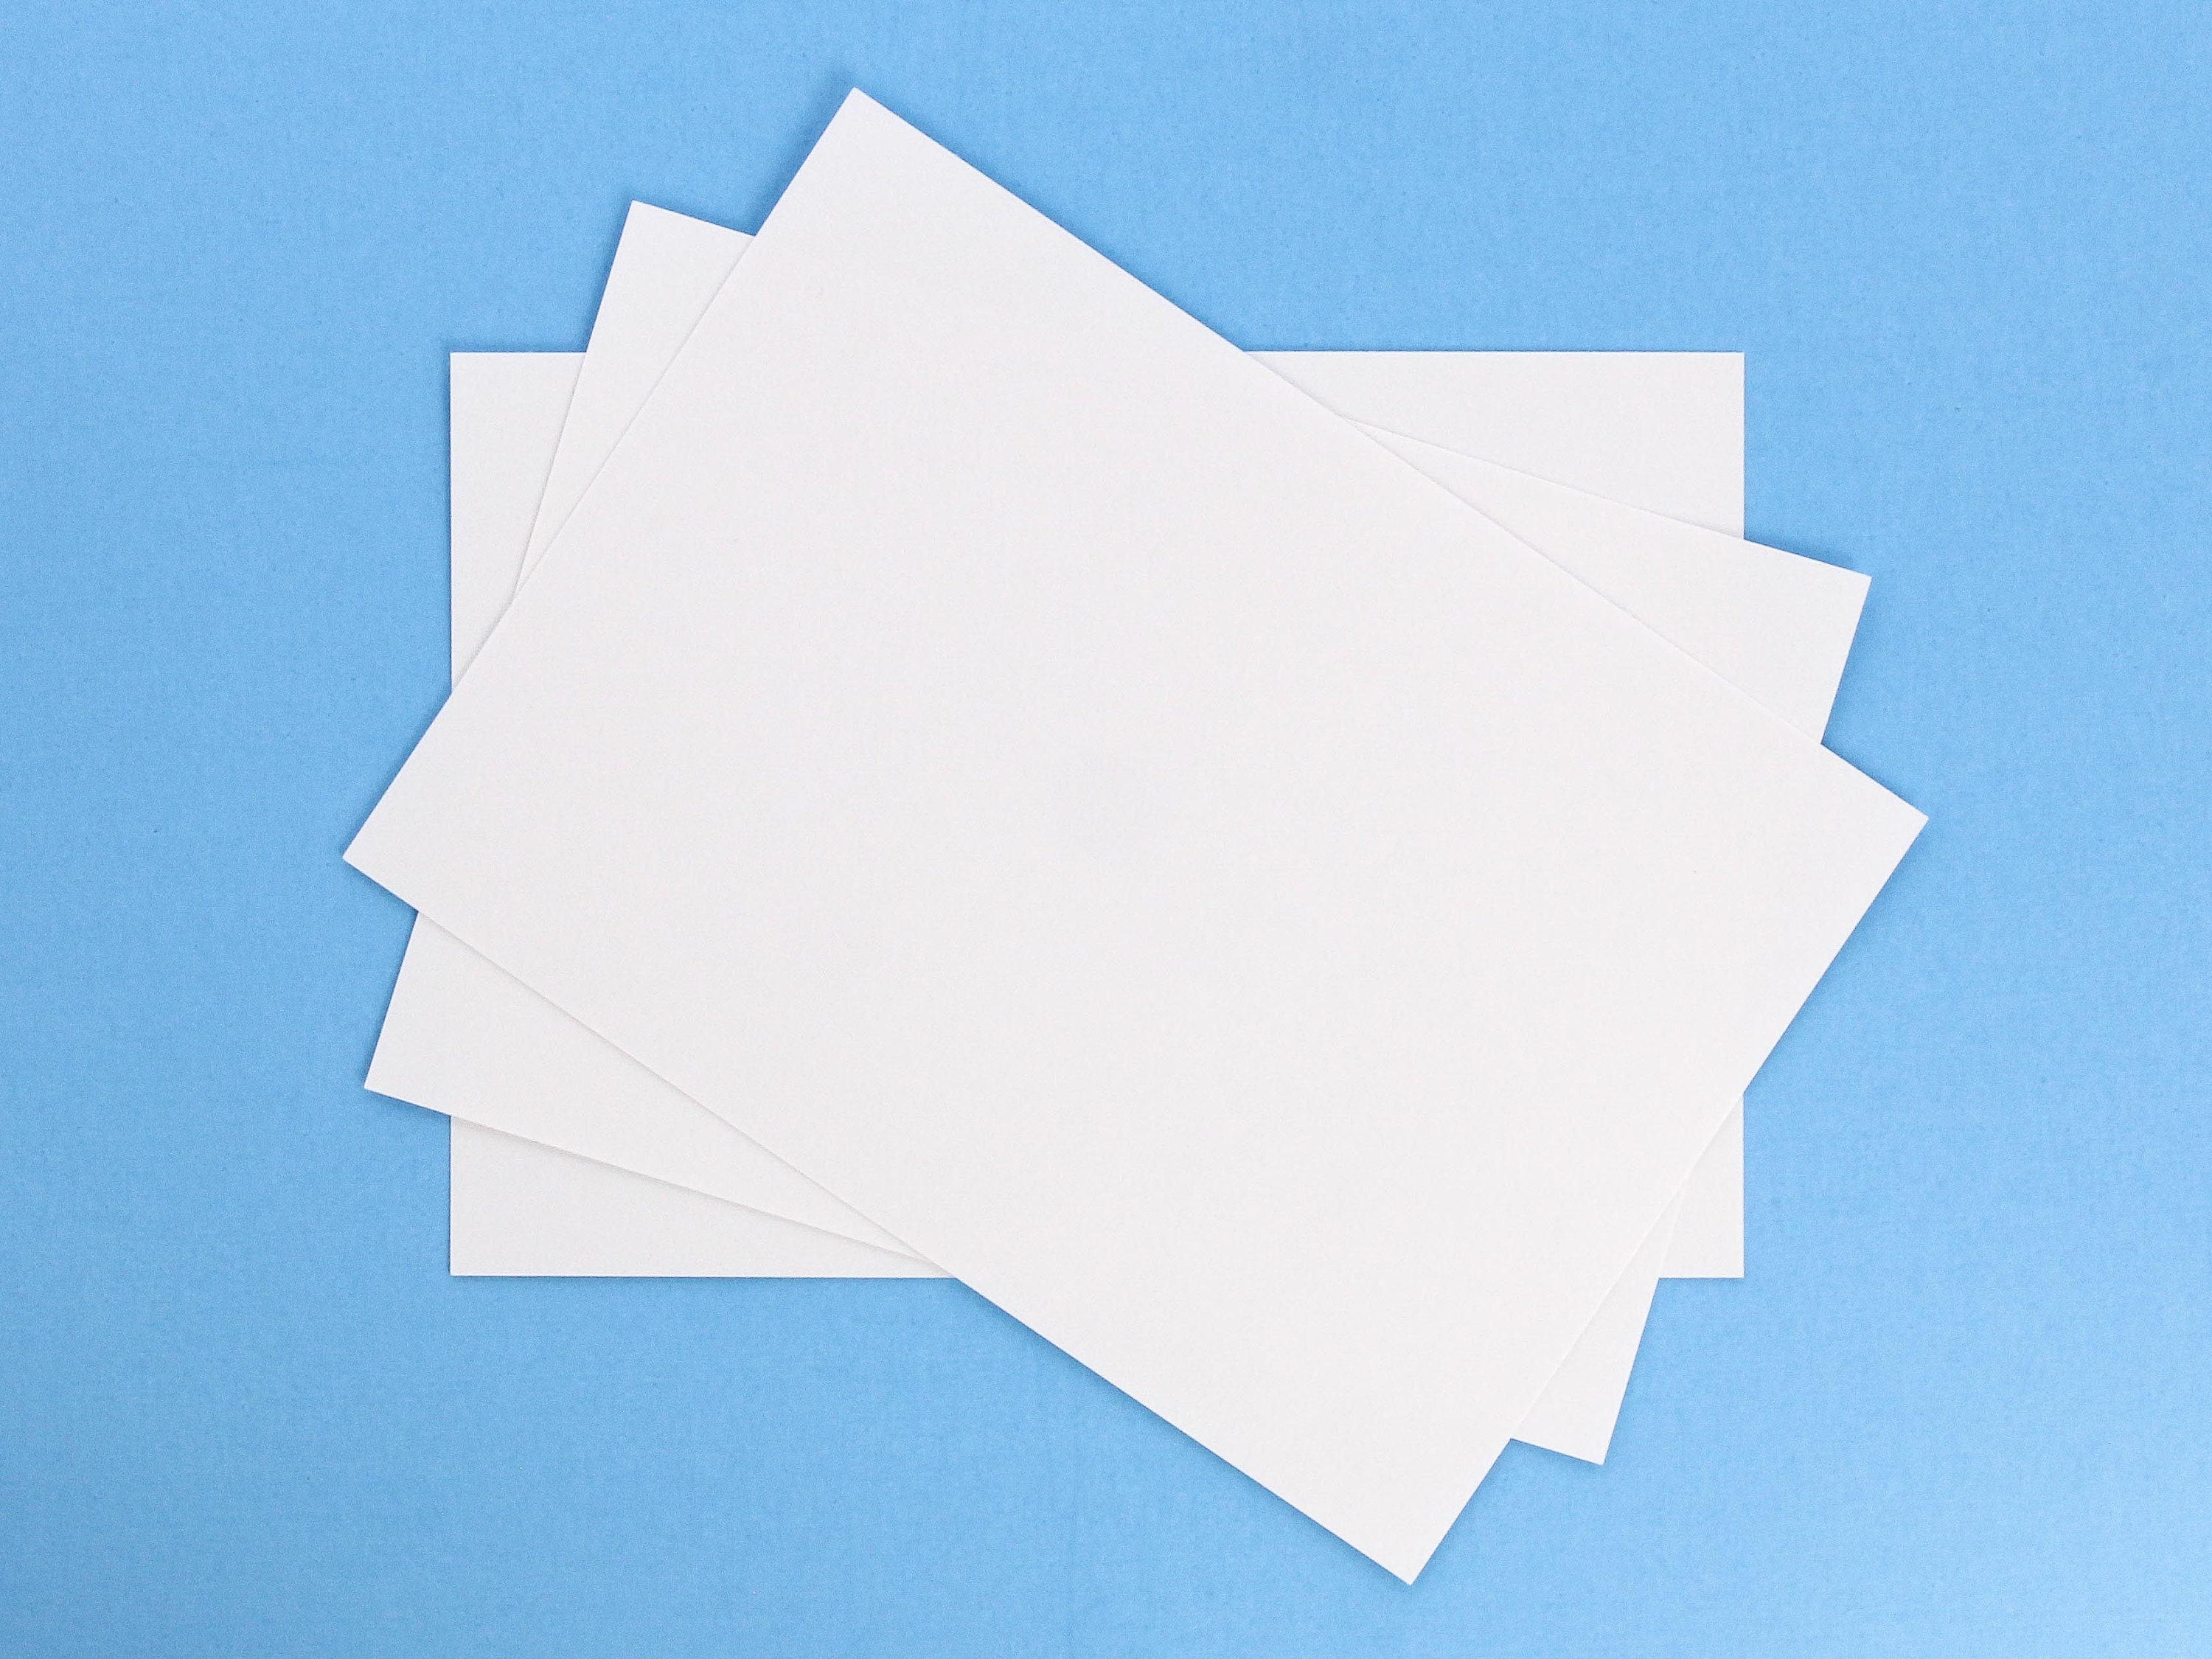 White Matte Note Cards, 65 lb, 4.25x5.5, 50/pack, 7 packs/case